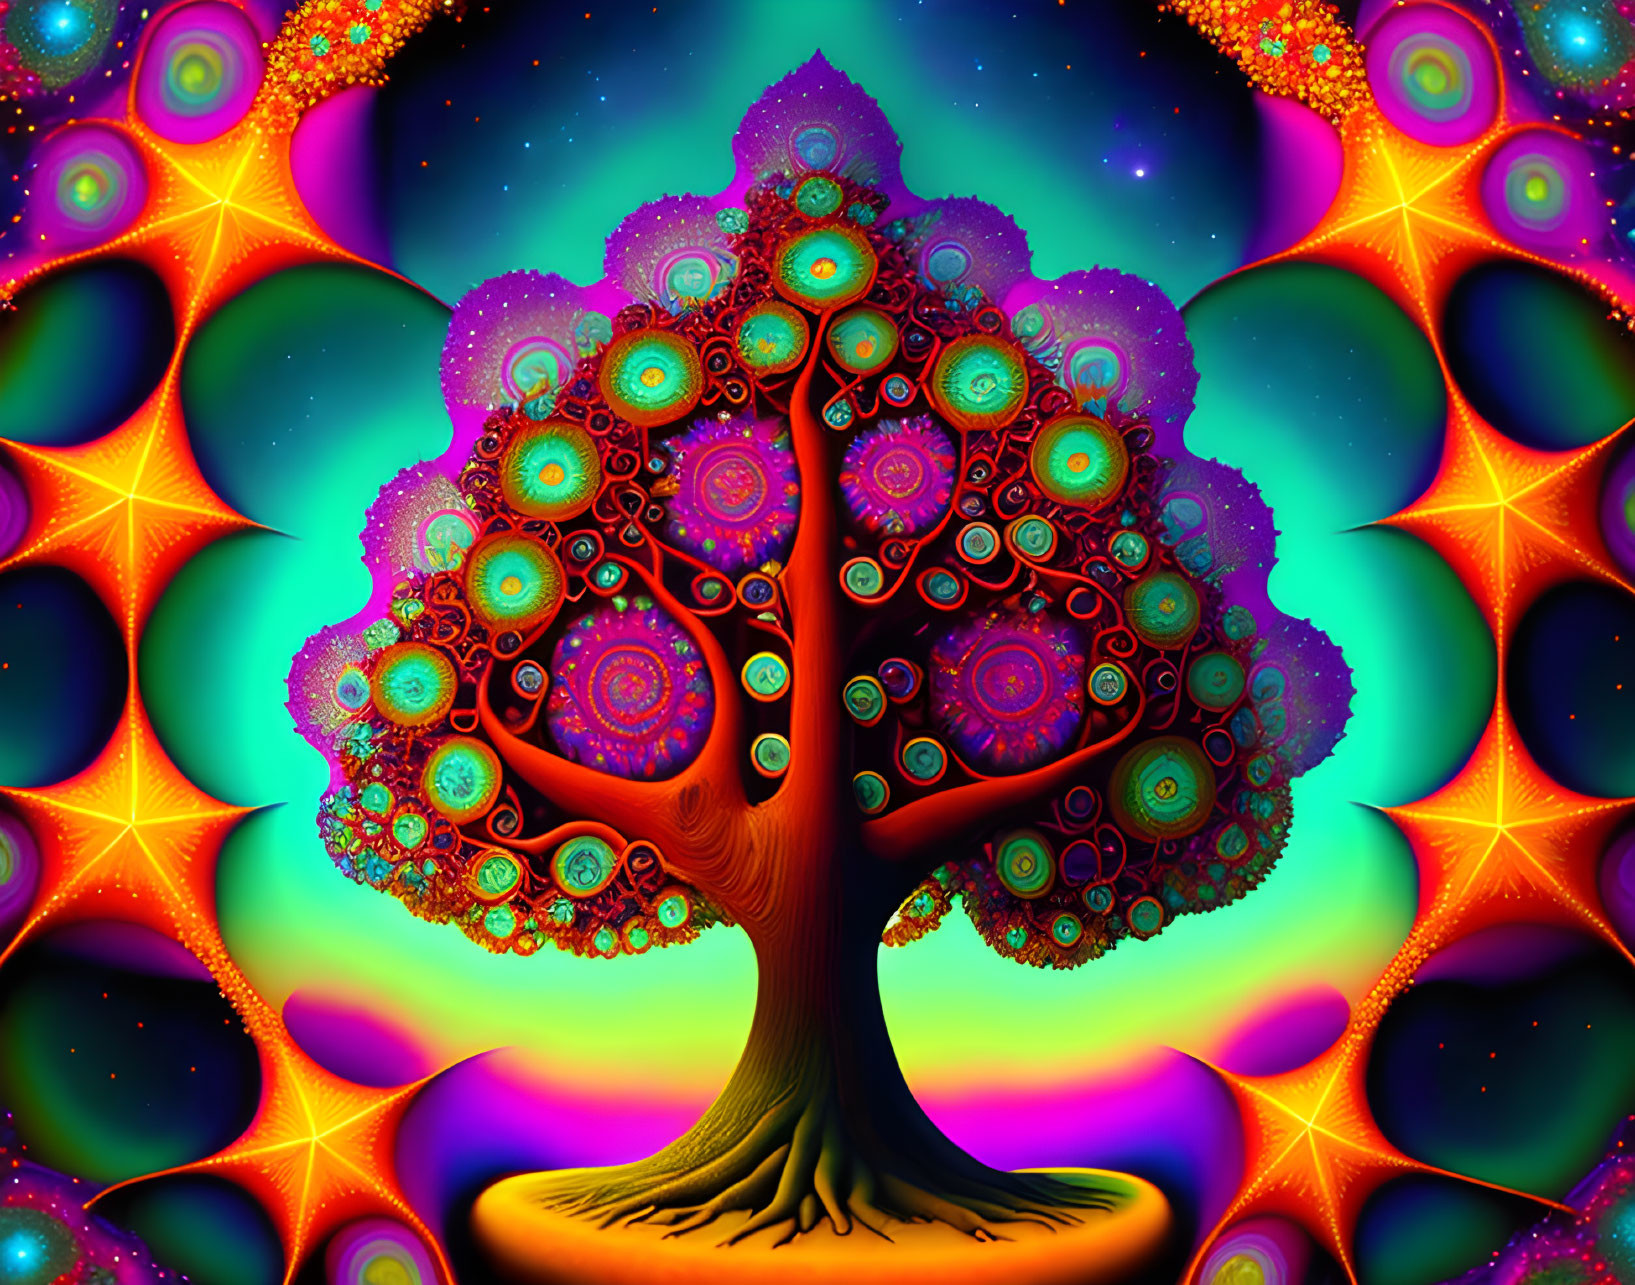 Colorful psychedelic tree digital artwork with fractal designs on starry background